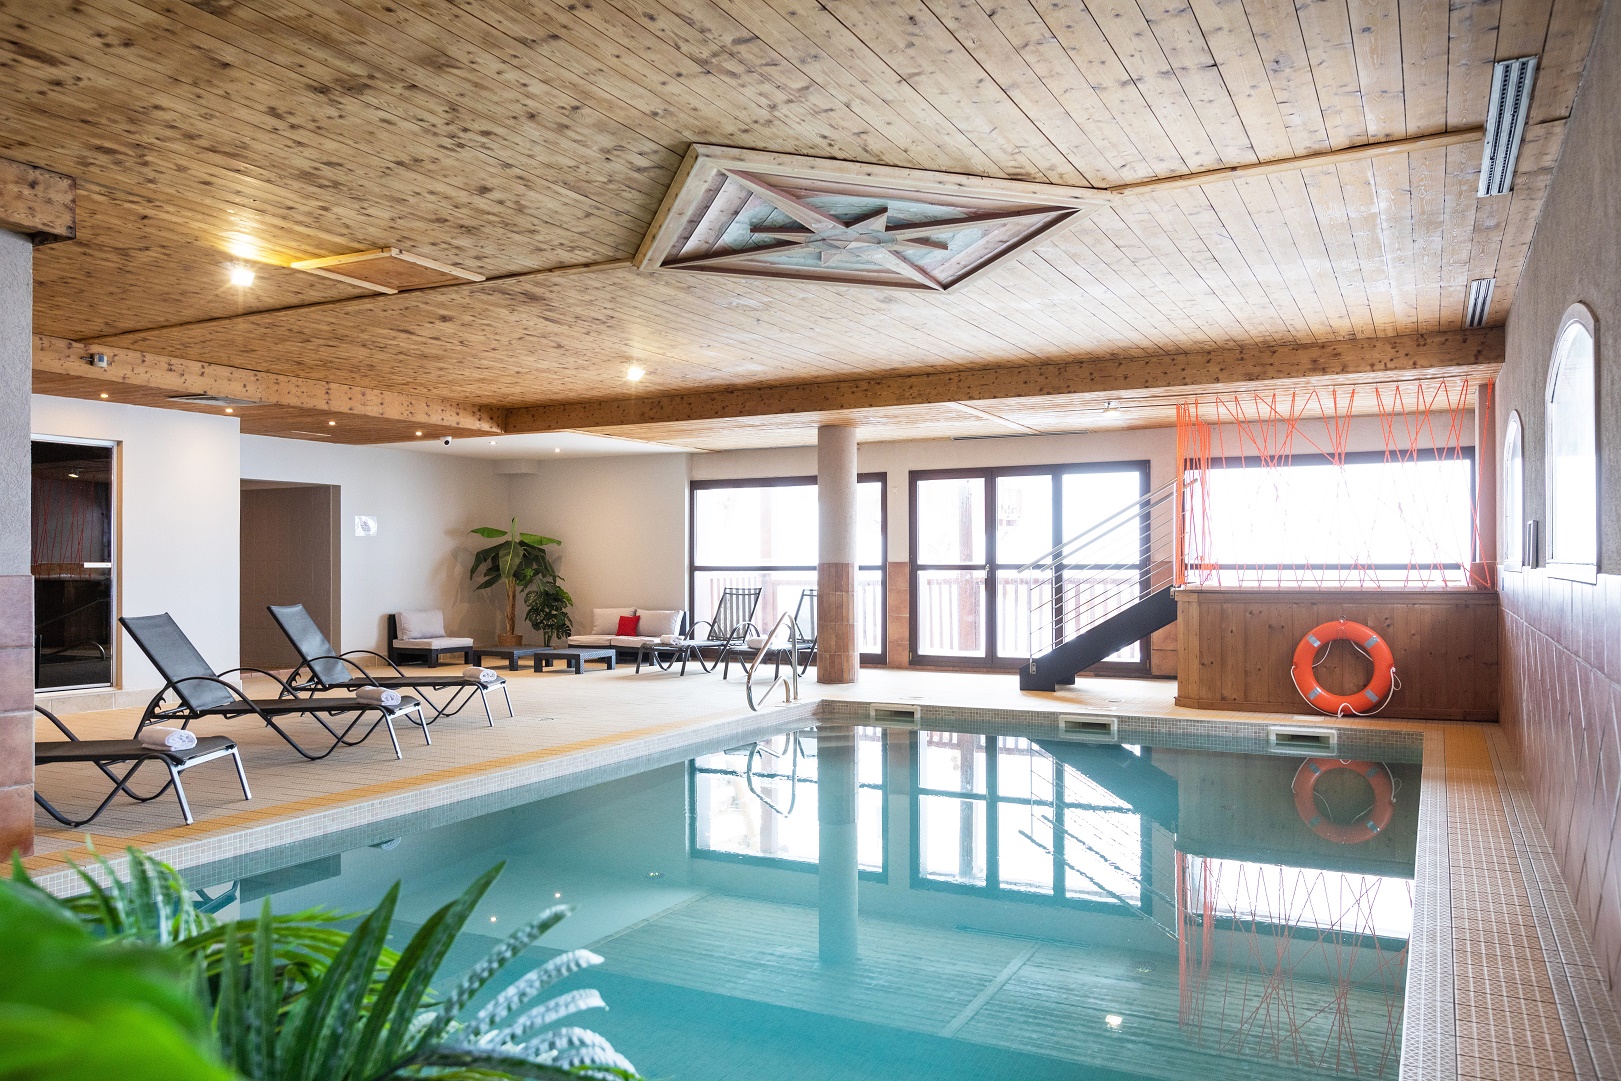 An image of the swimming pool at Chalet Des Neiges Hermine